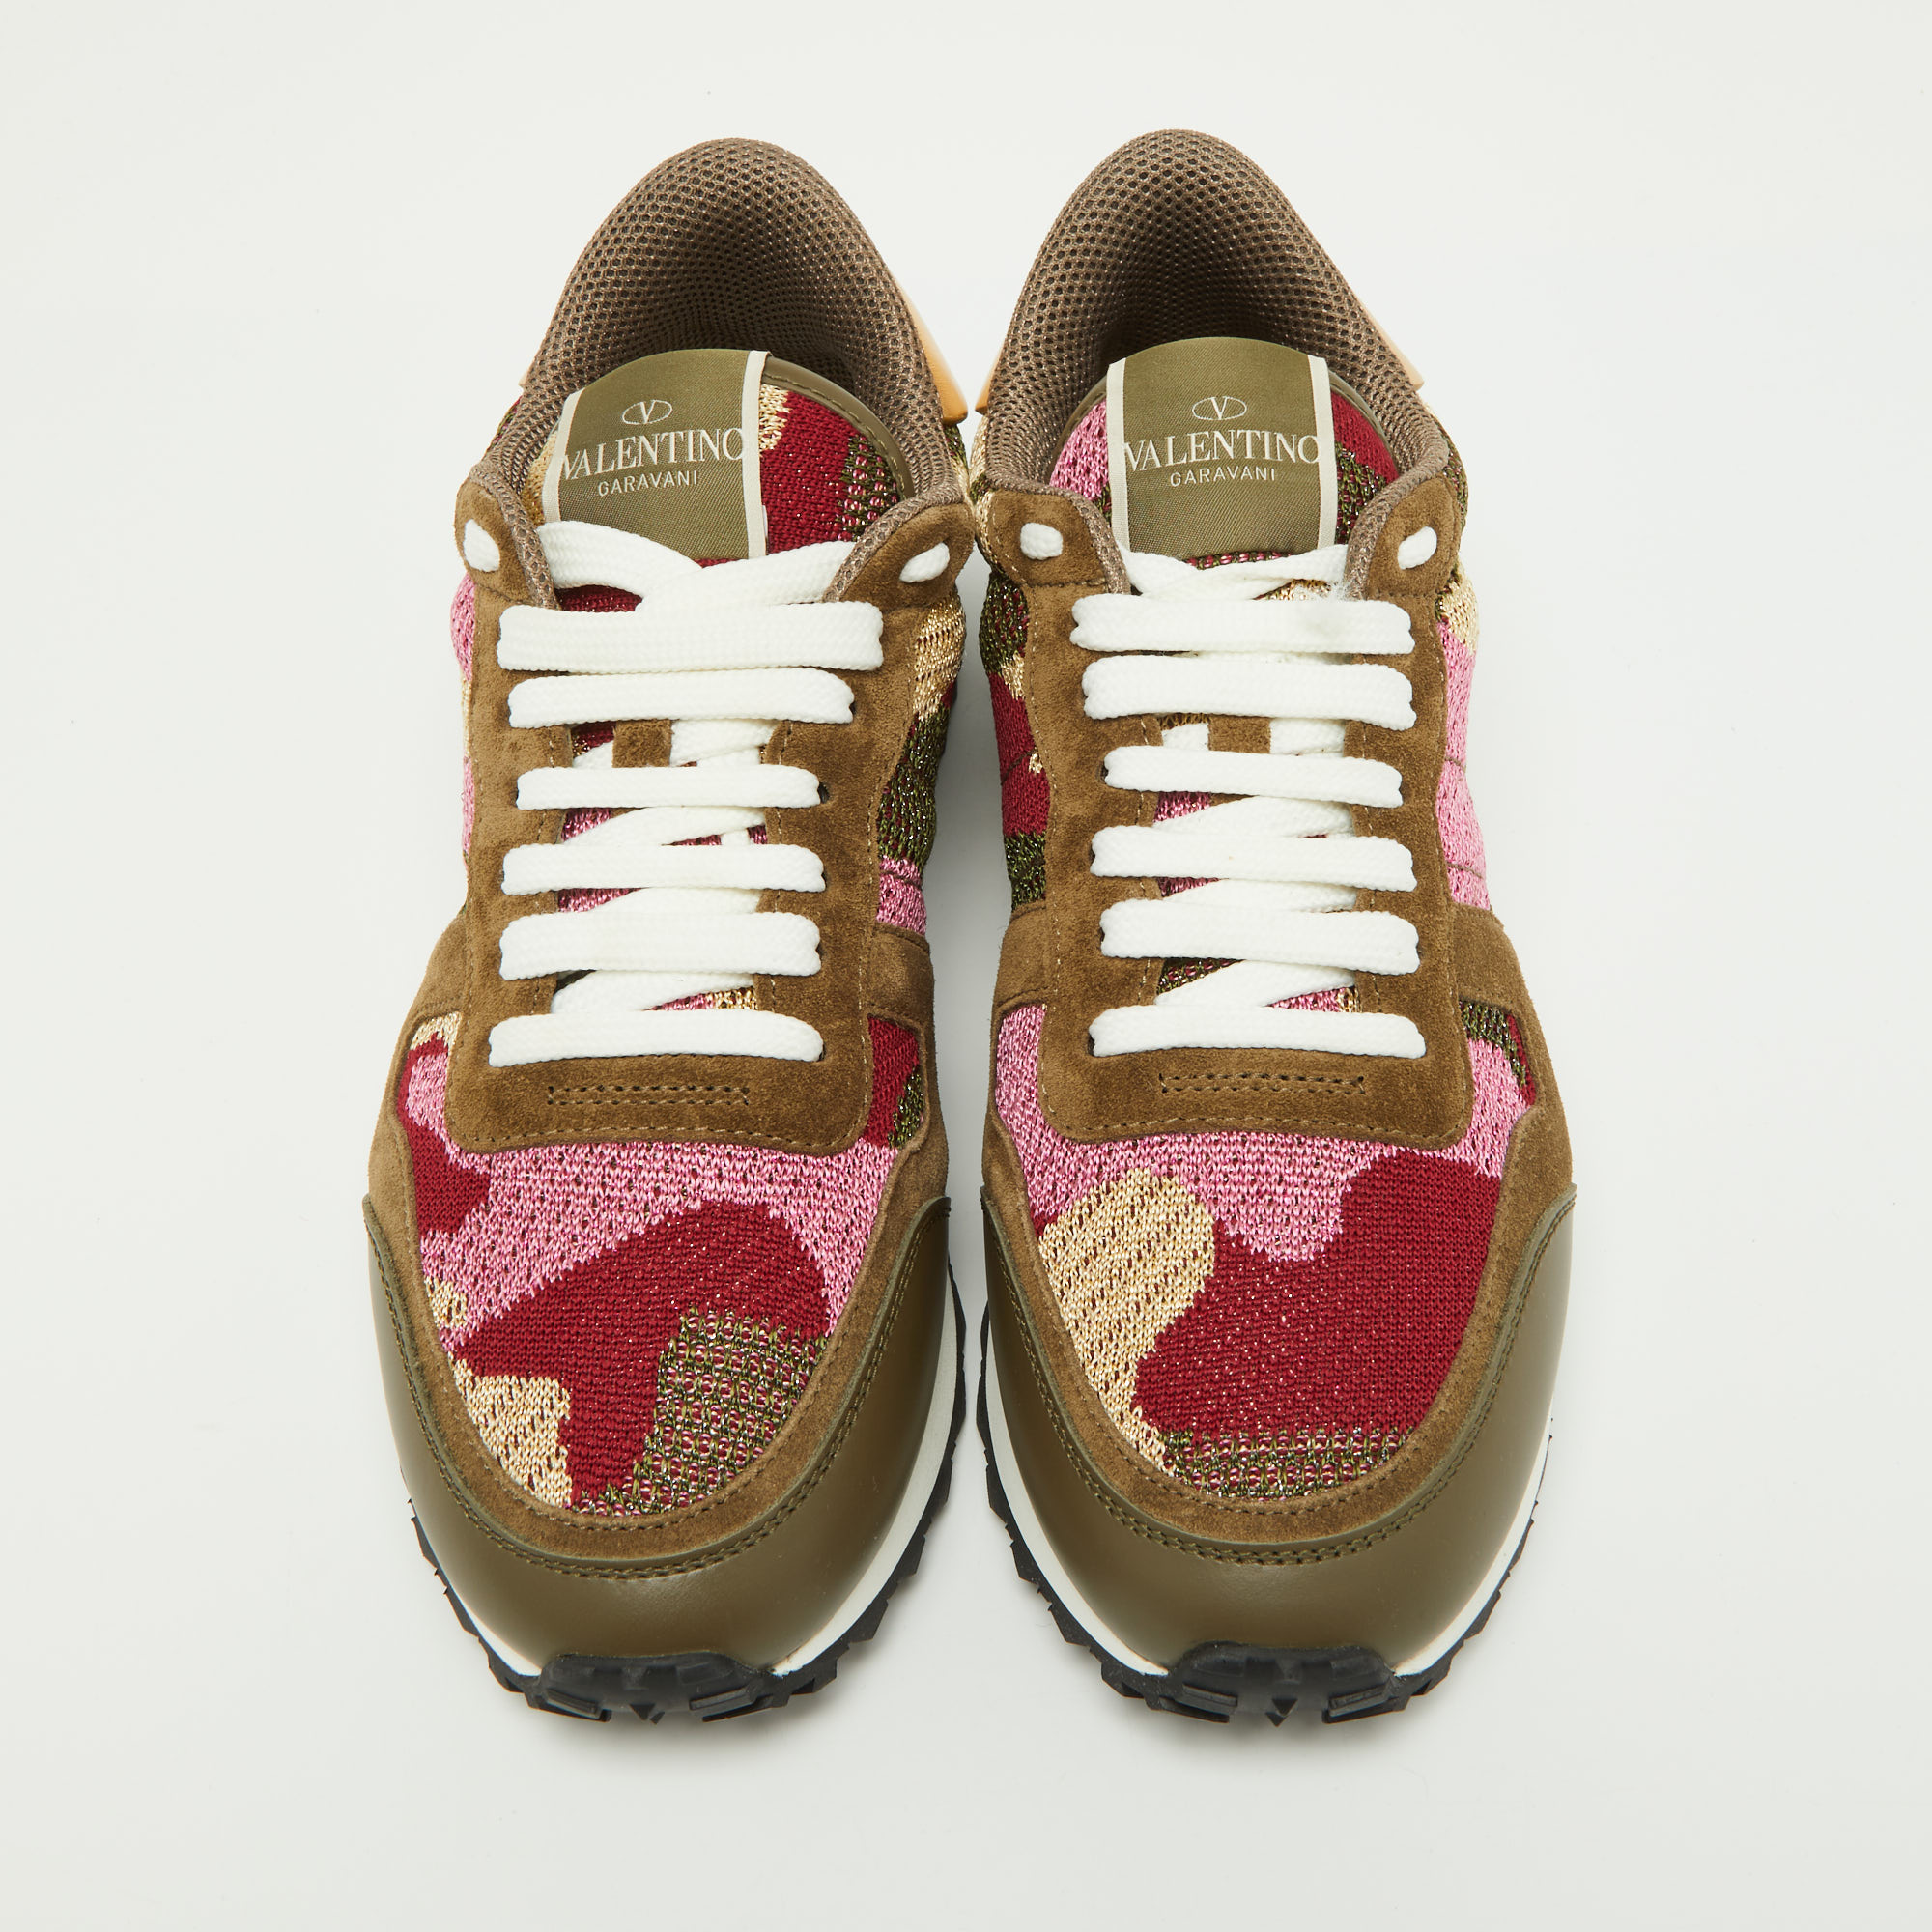 Valentino Multicolor Camo Print Suede,Leather And Knit Fabric Rockrunner Sneakers Size 38